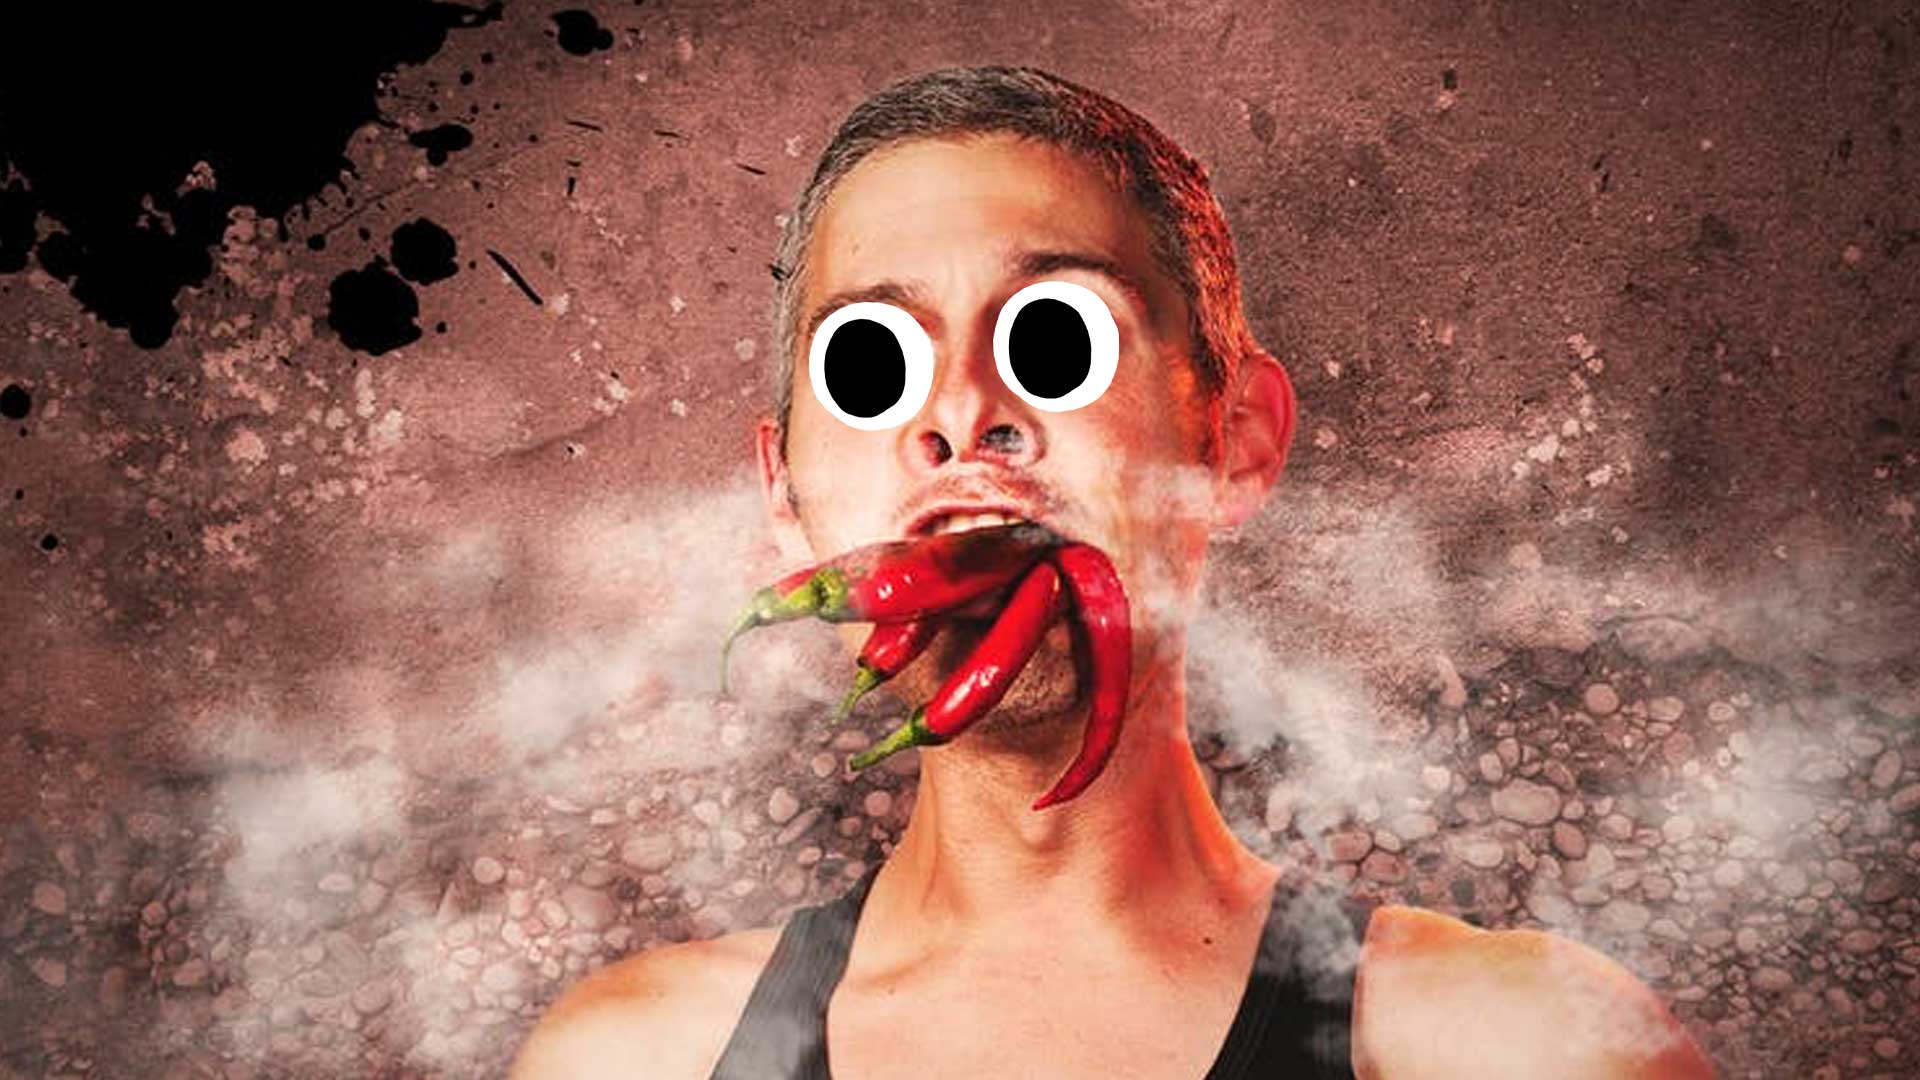 A man eating hot chilli peppers